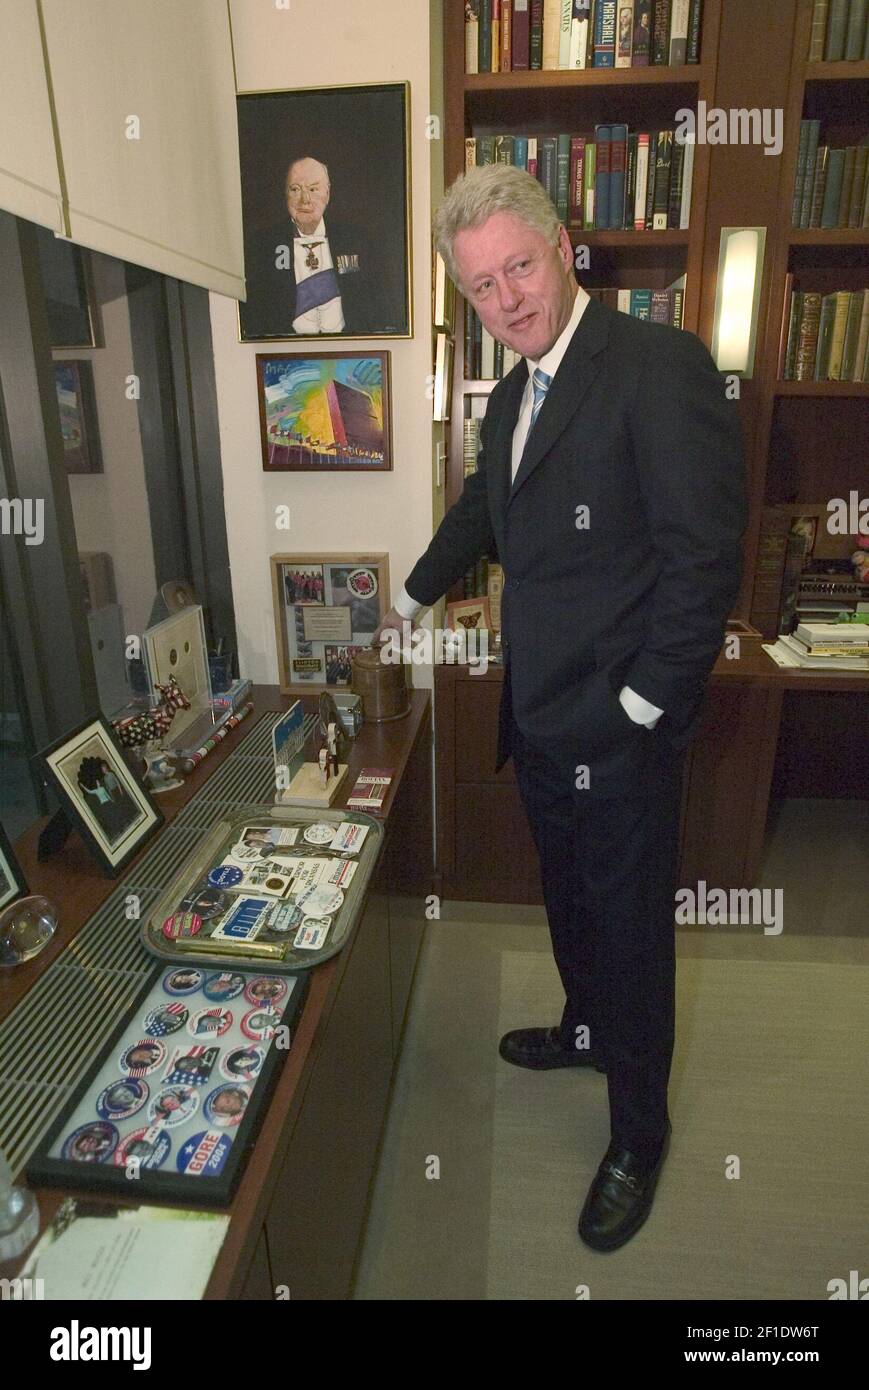 Feb 11, 2004; New York, NY, USA; A day in the life of former President Bill Clinton in NYC. He is showing his collection of mementos in his Harlem offices. Mandatory Credit: Robert Deutsch-USA TODAY /Sipa USA Stock Photo